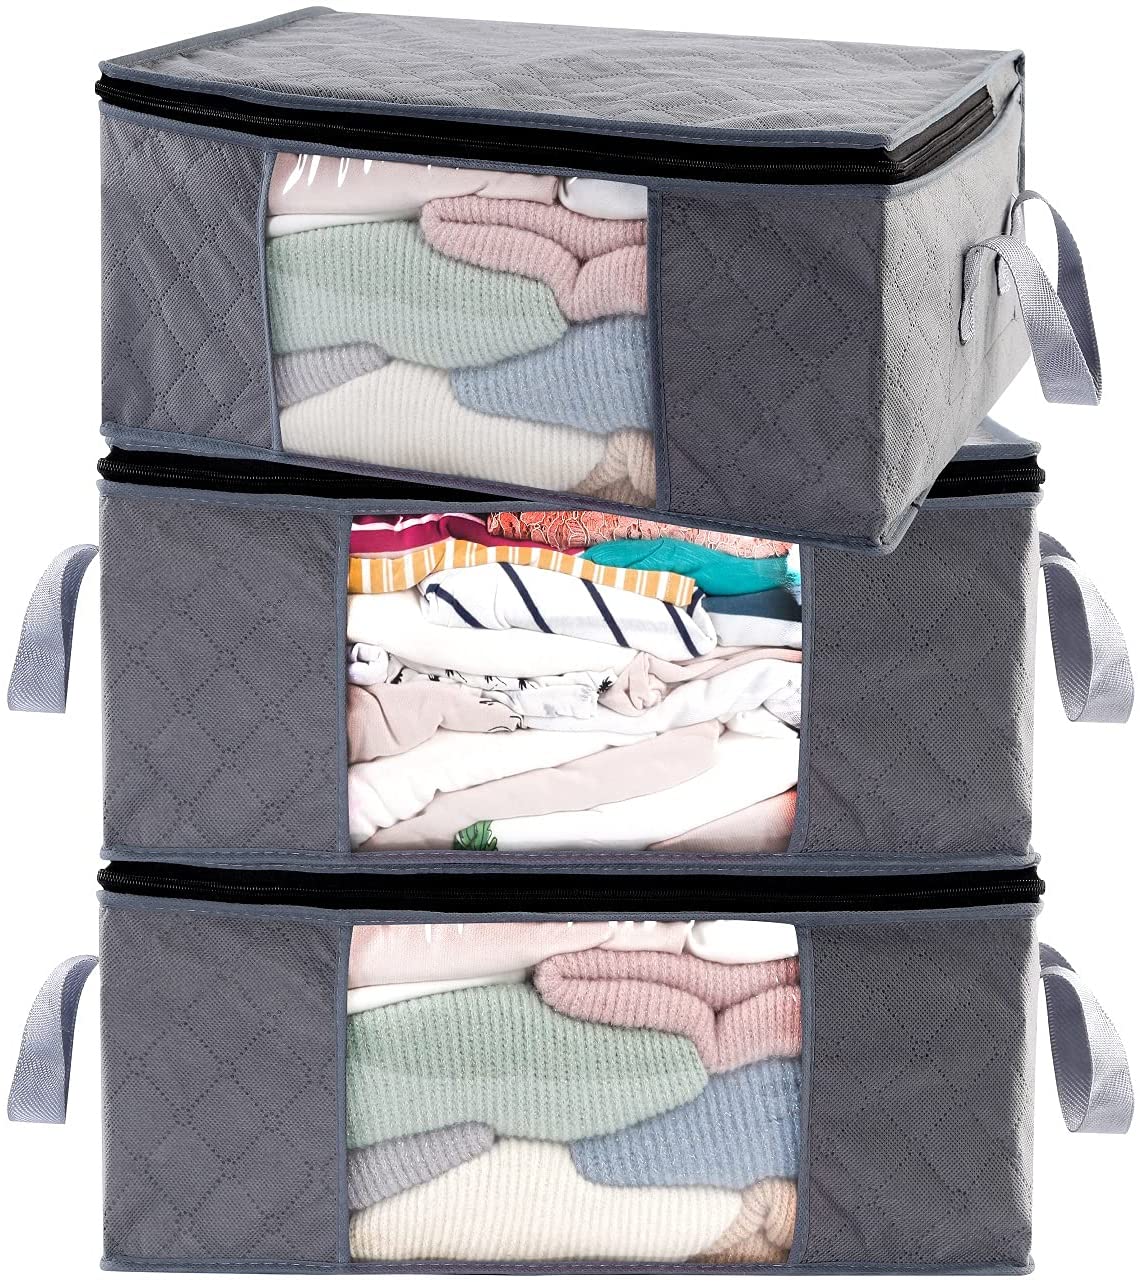 ABO Gear Multifunctional Foldable Storage Container, 3-Pack